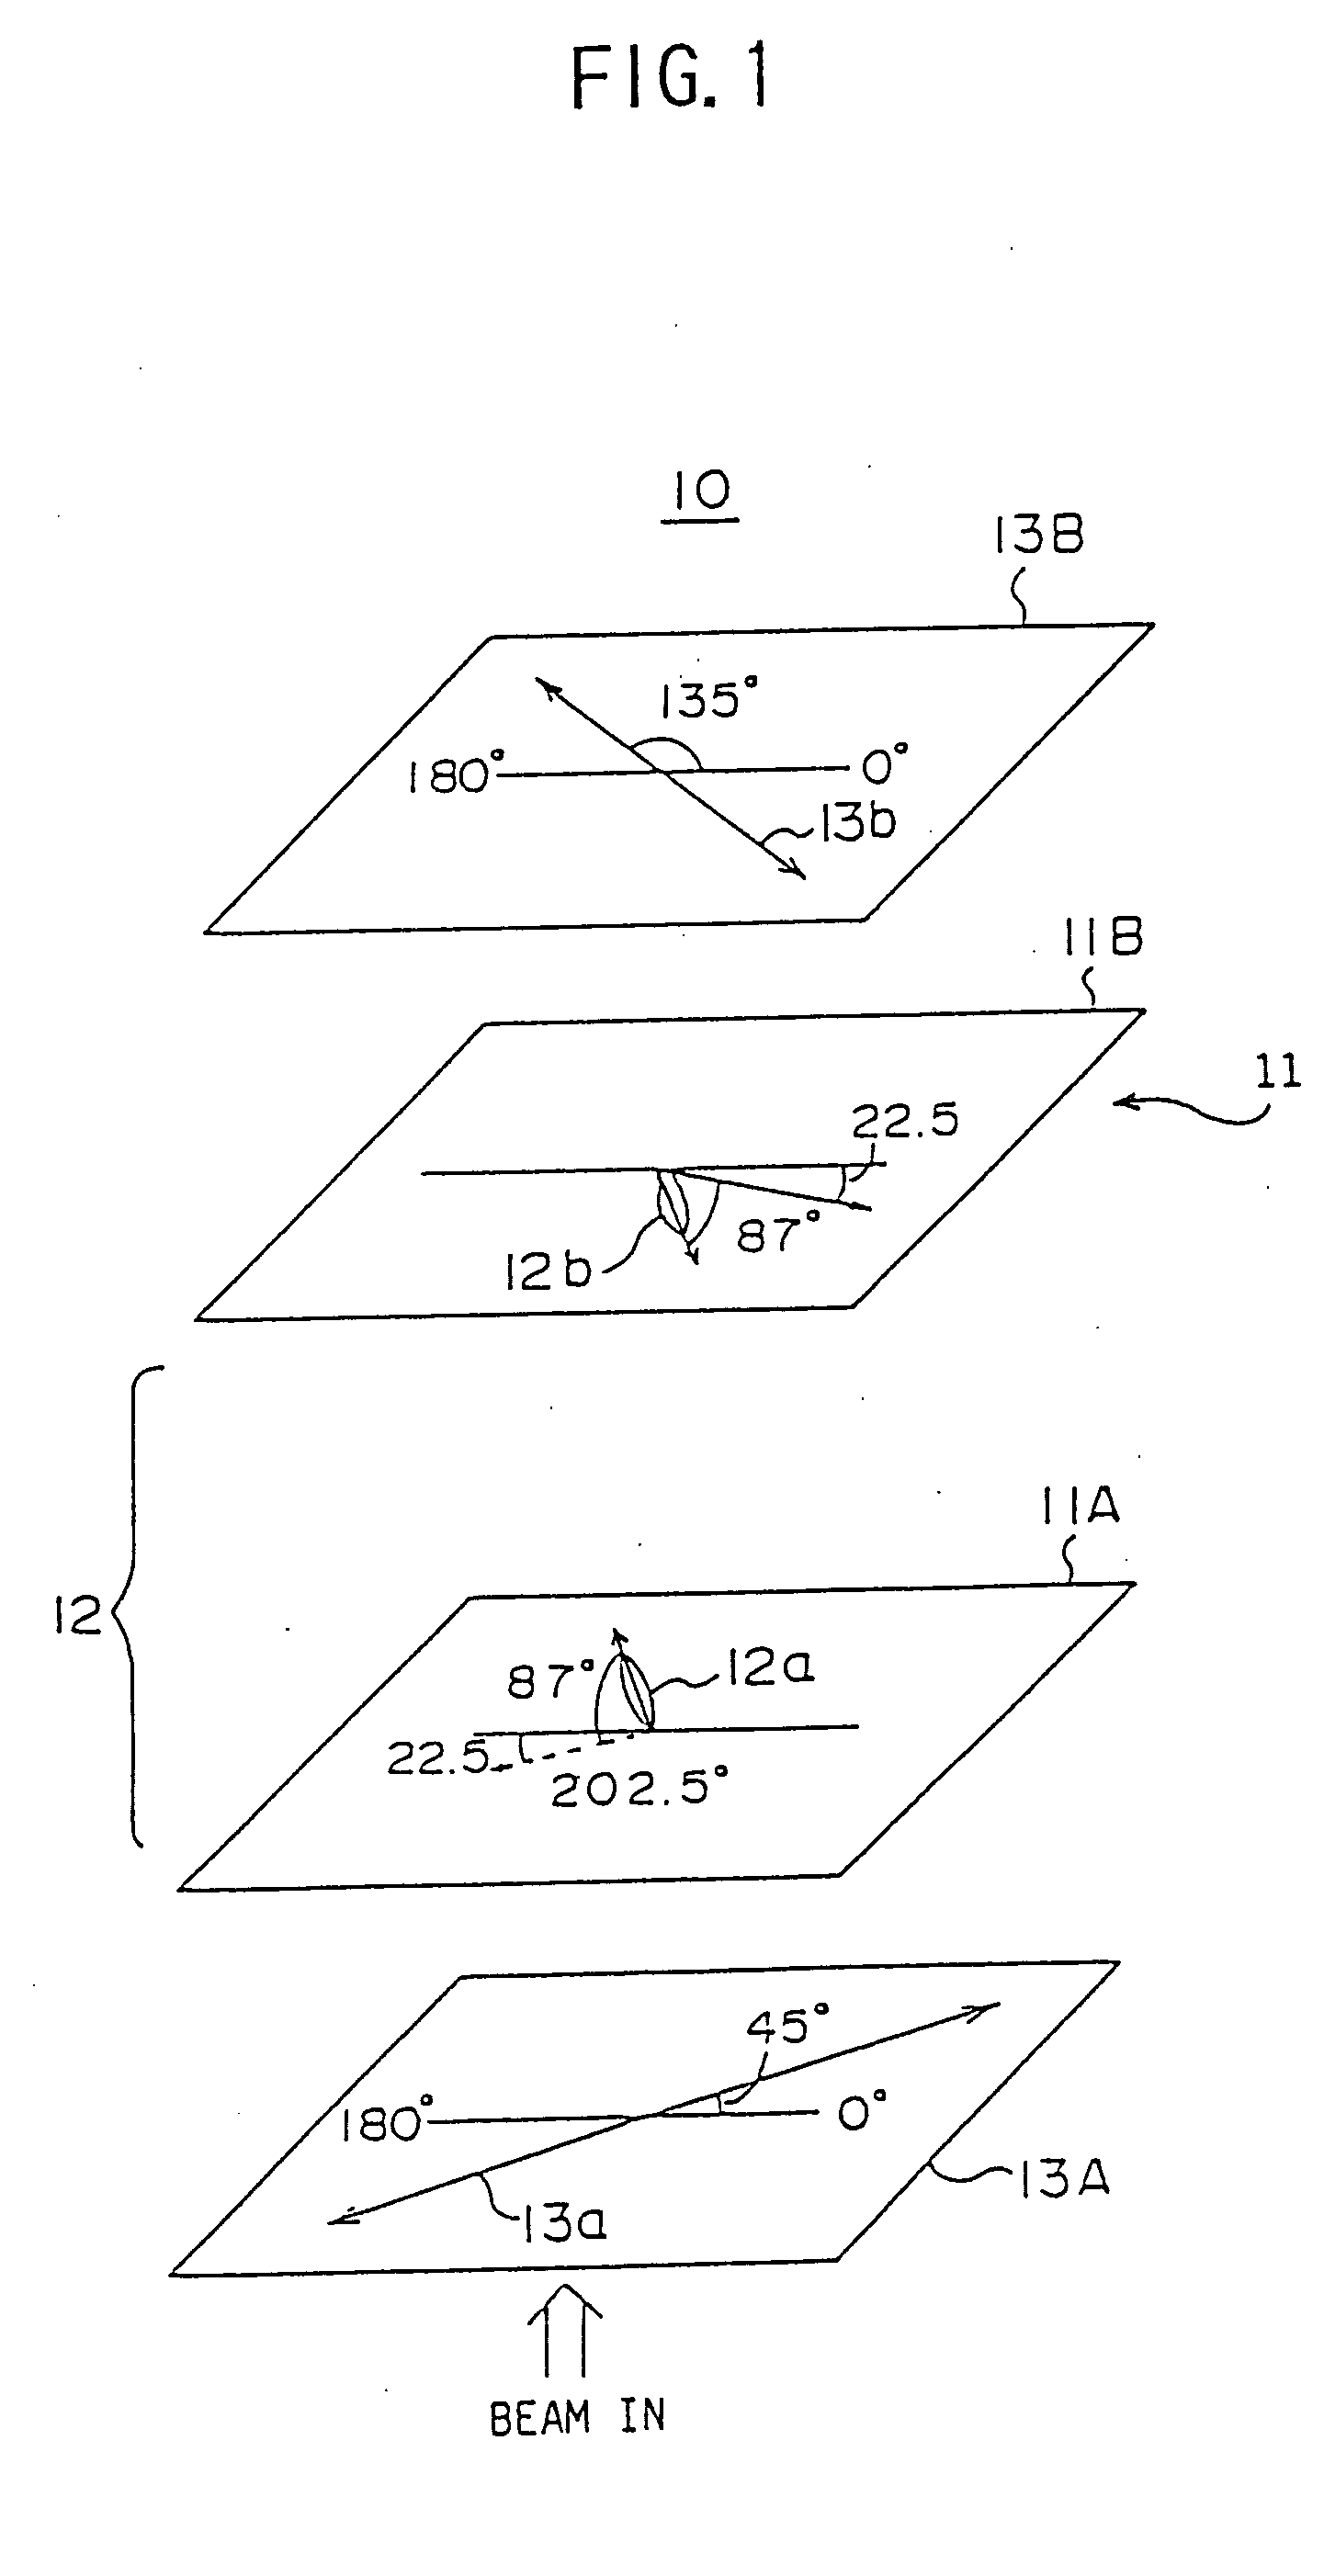 Transmitter and receiver for use with an orthogonal frequency division multiplexing system